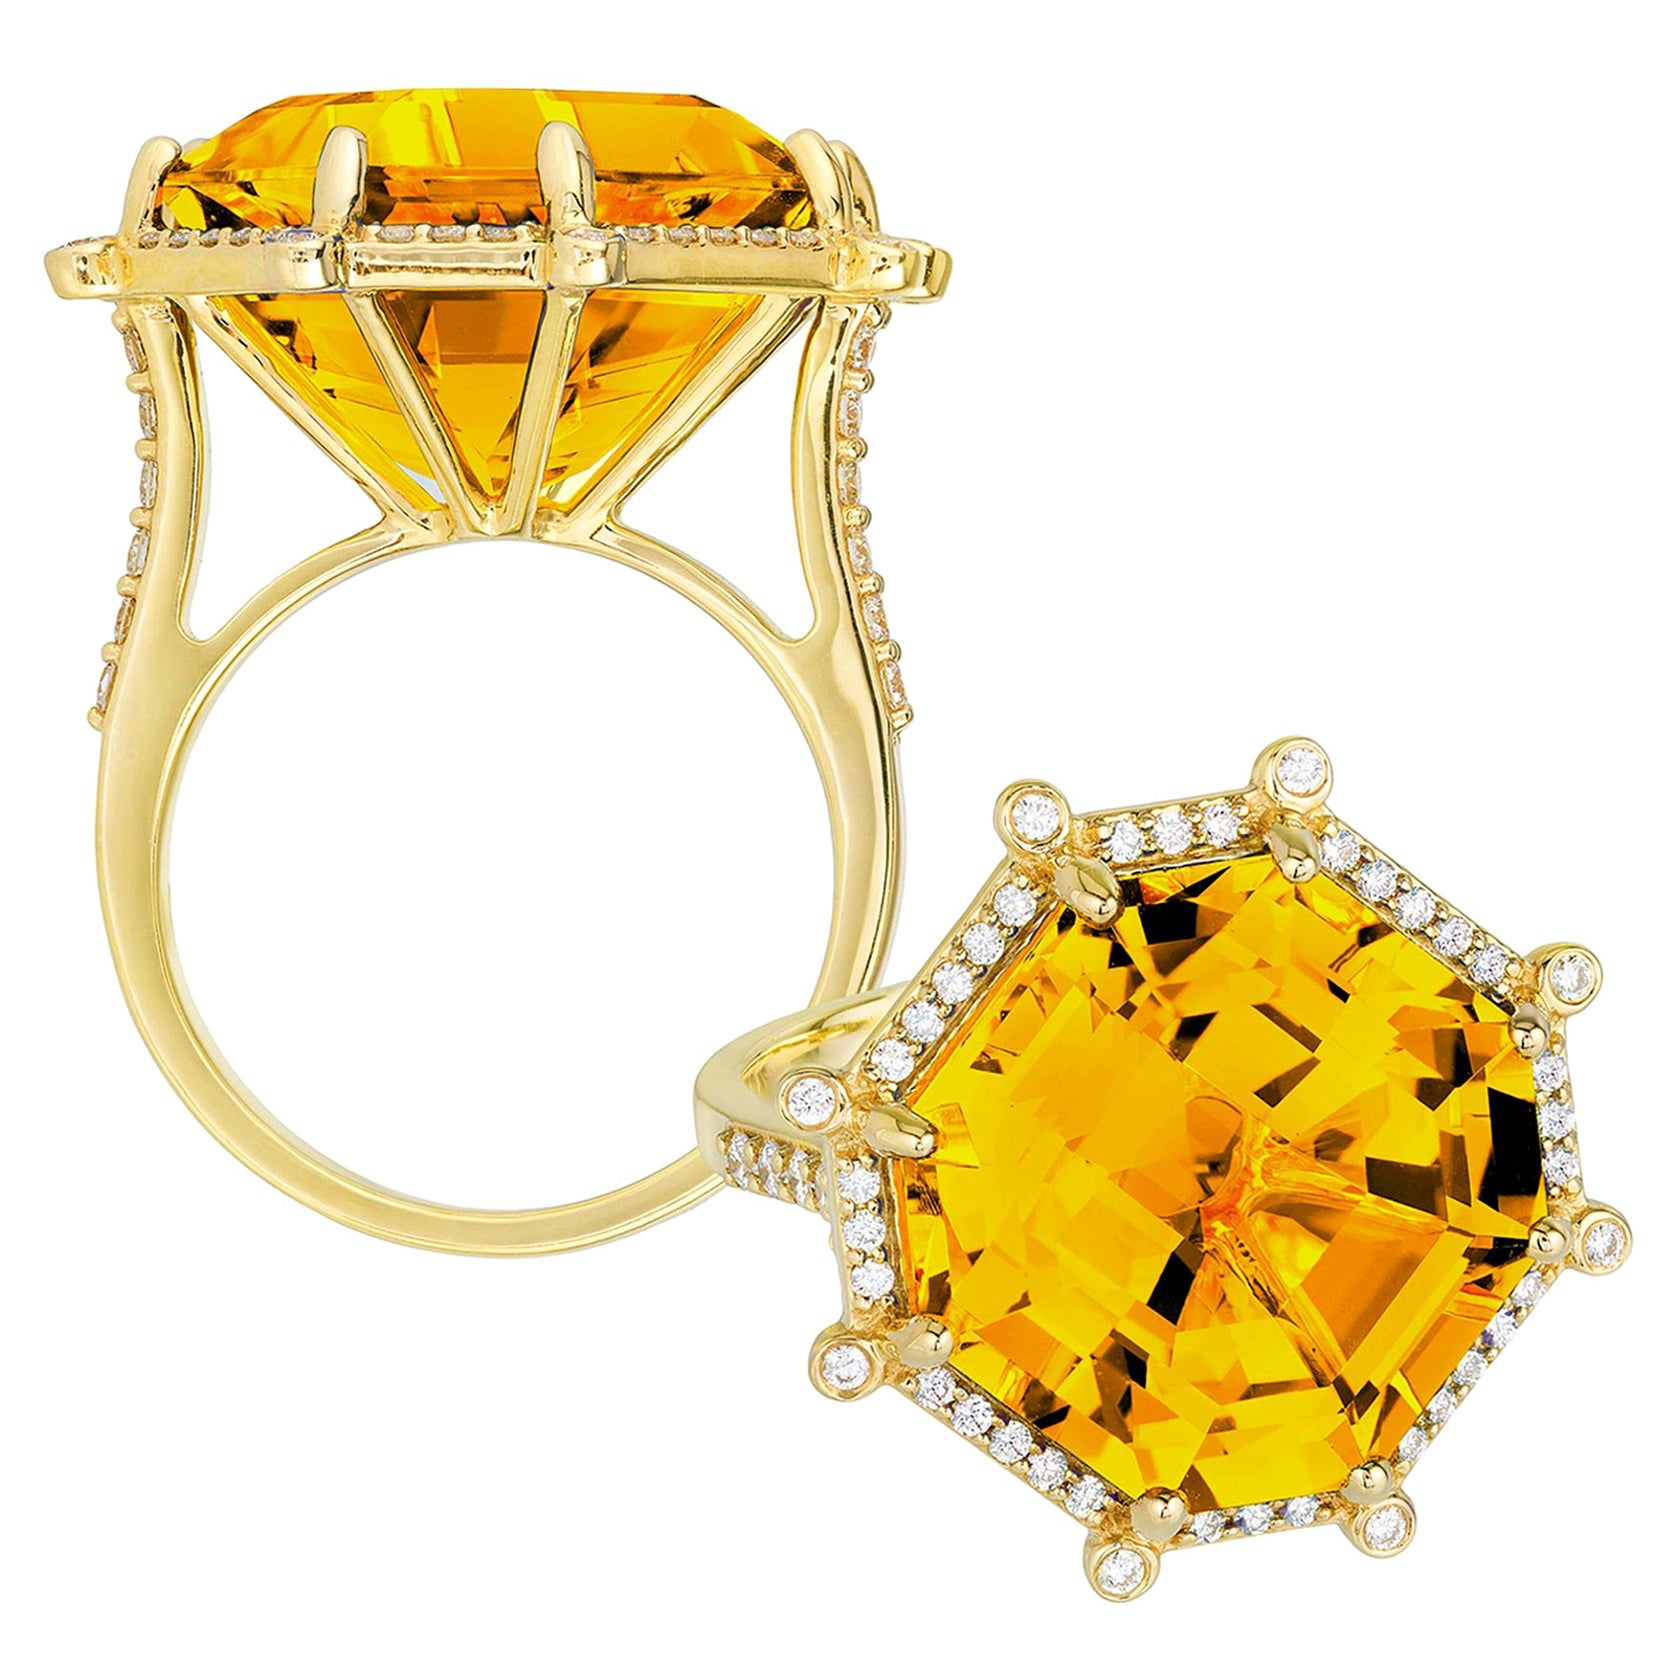 Can I wear a citrine ring every day?